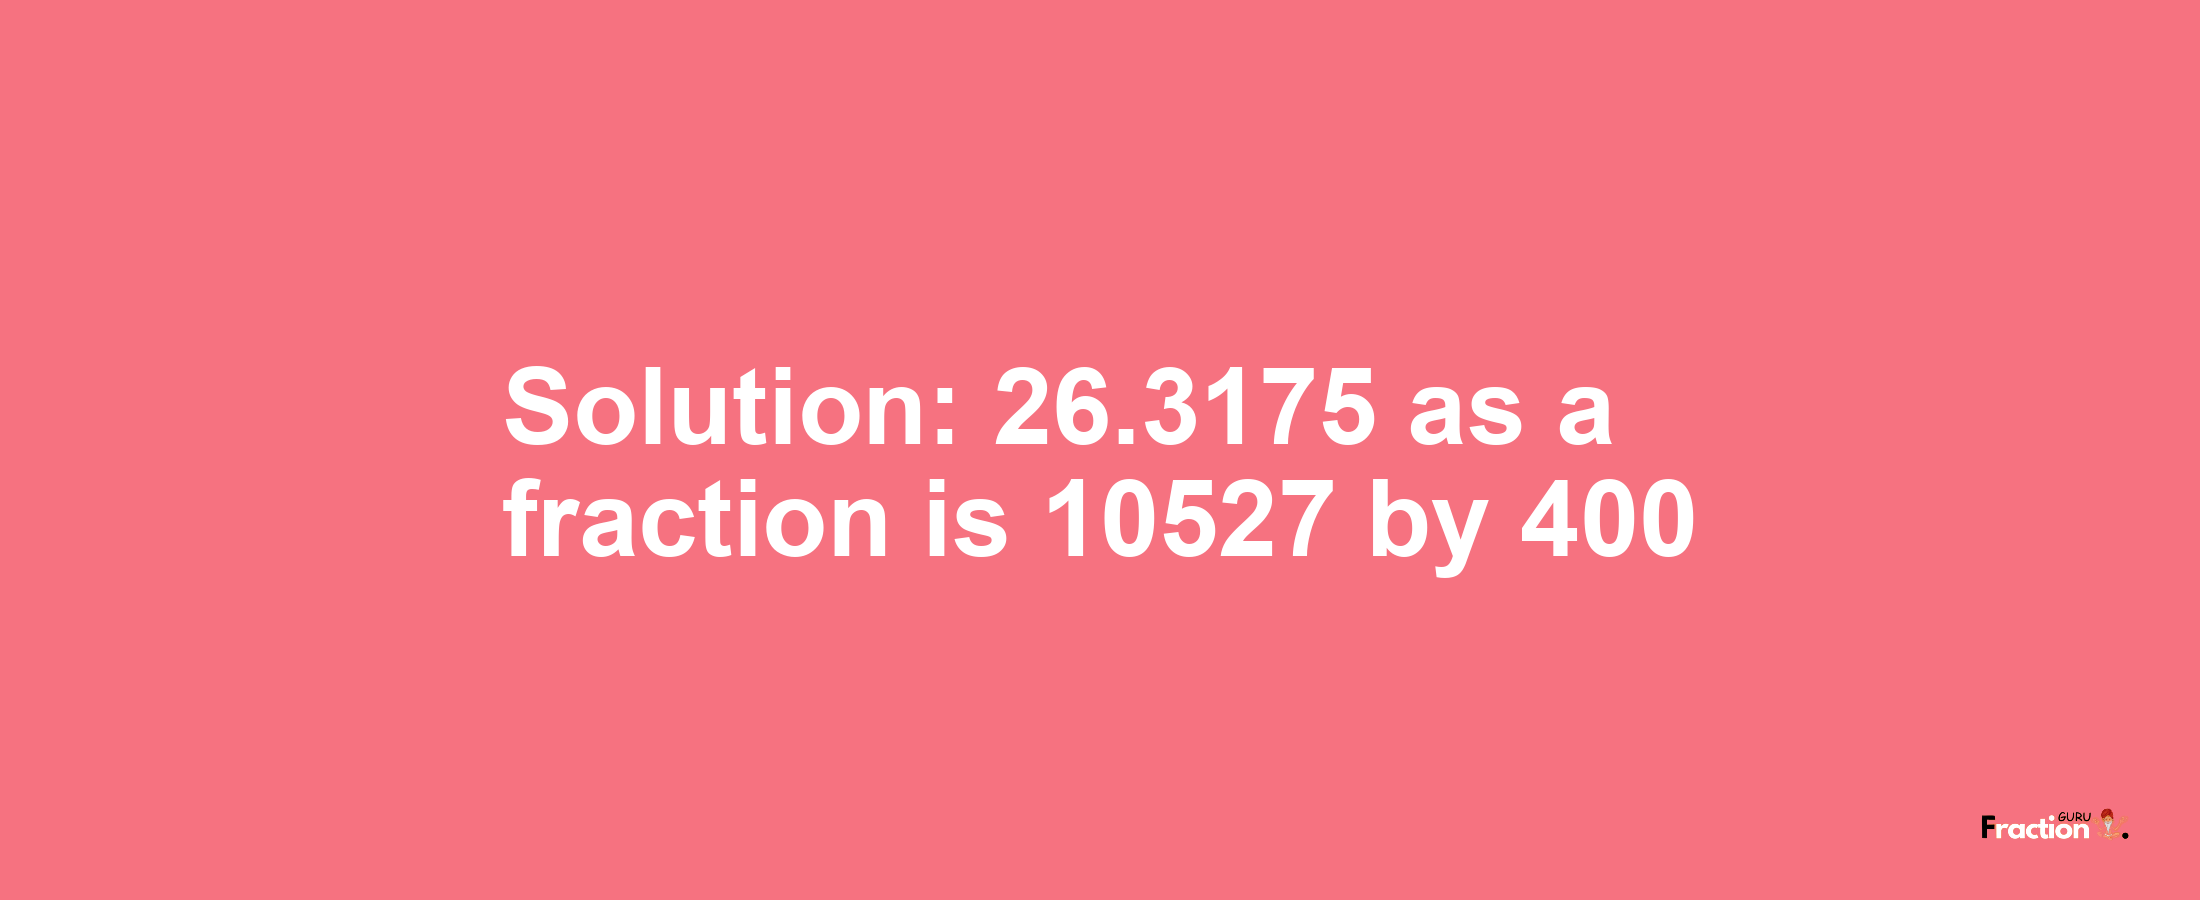 Solution:26.3175 as a fraction is 10527/400